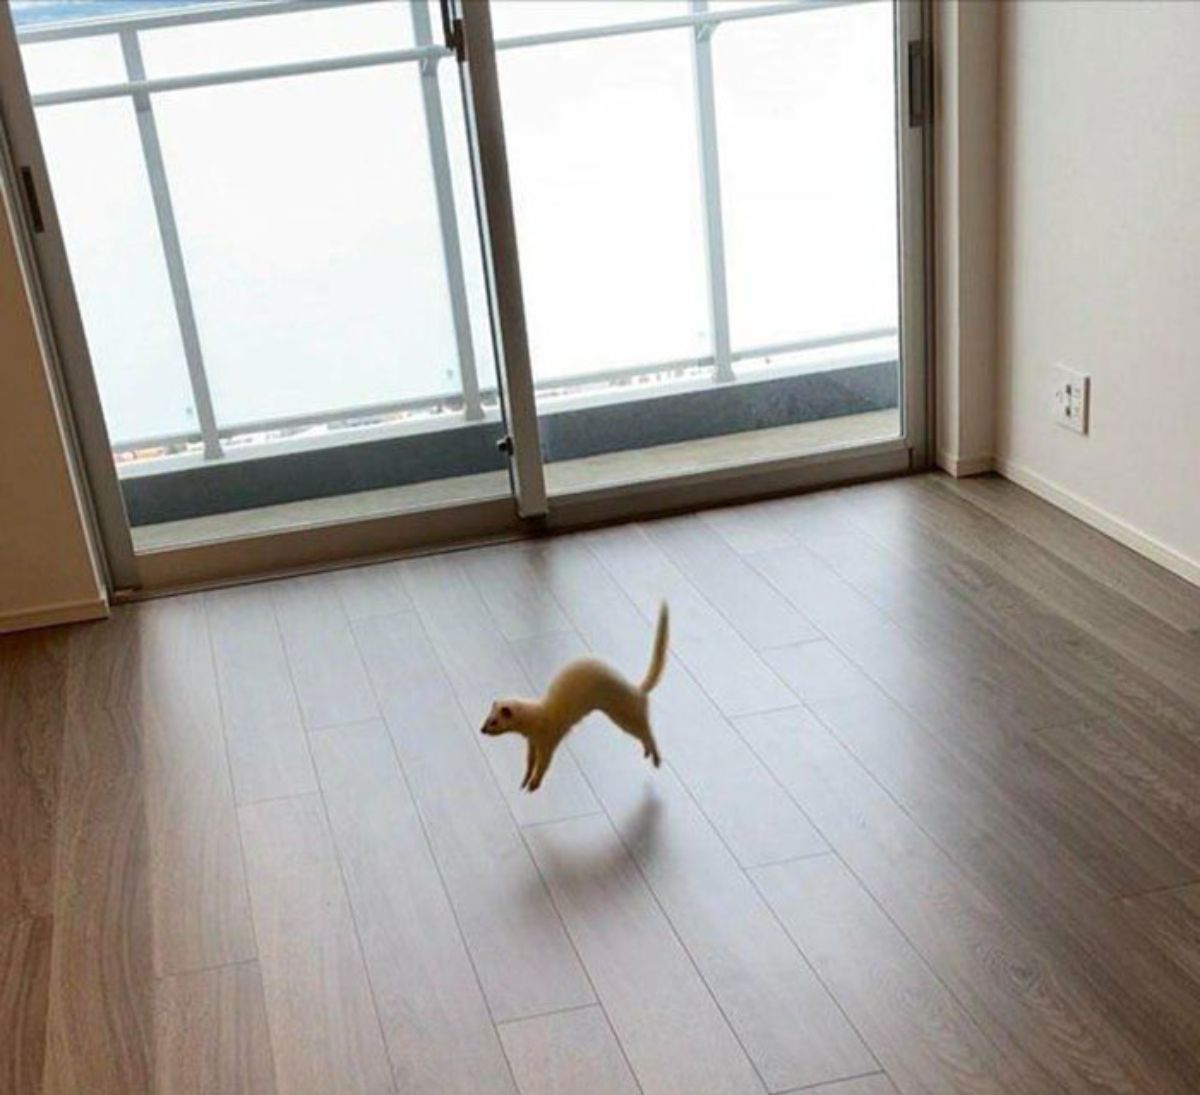 white ferret caught mid air jumping on wooden floor making a reverse n shape with its body and shape